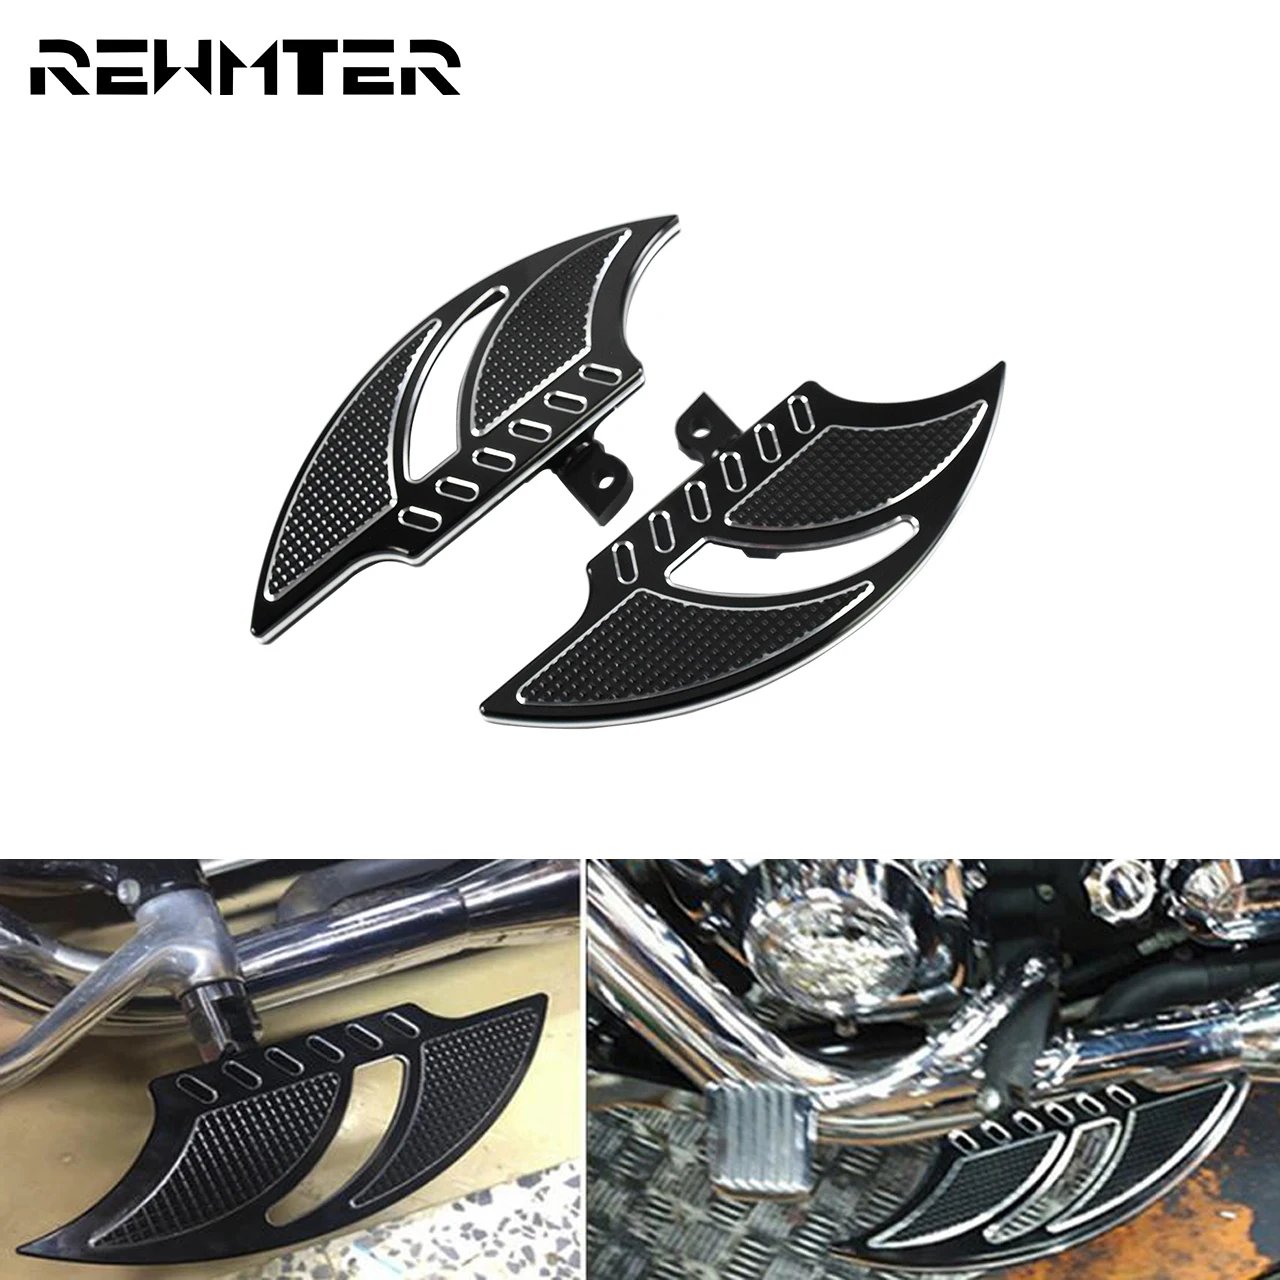 

Motorcycle Floorboards Footpegs Footrest Pedal Black For Harley Sportster XL 1200 883 Touring Electra Glide FLHR Dyna Softail FL